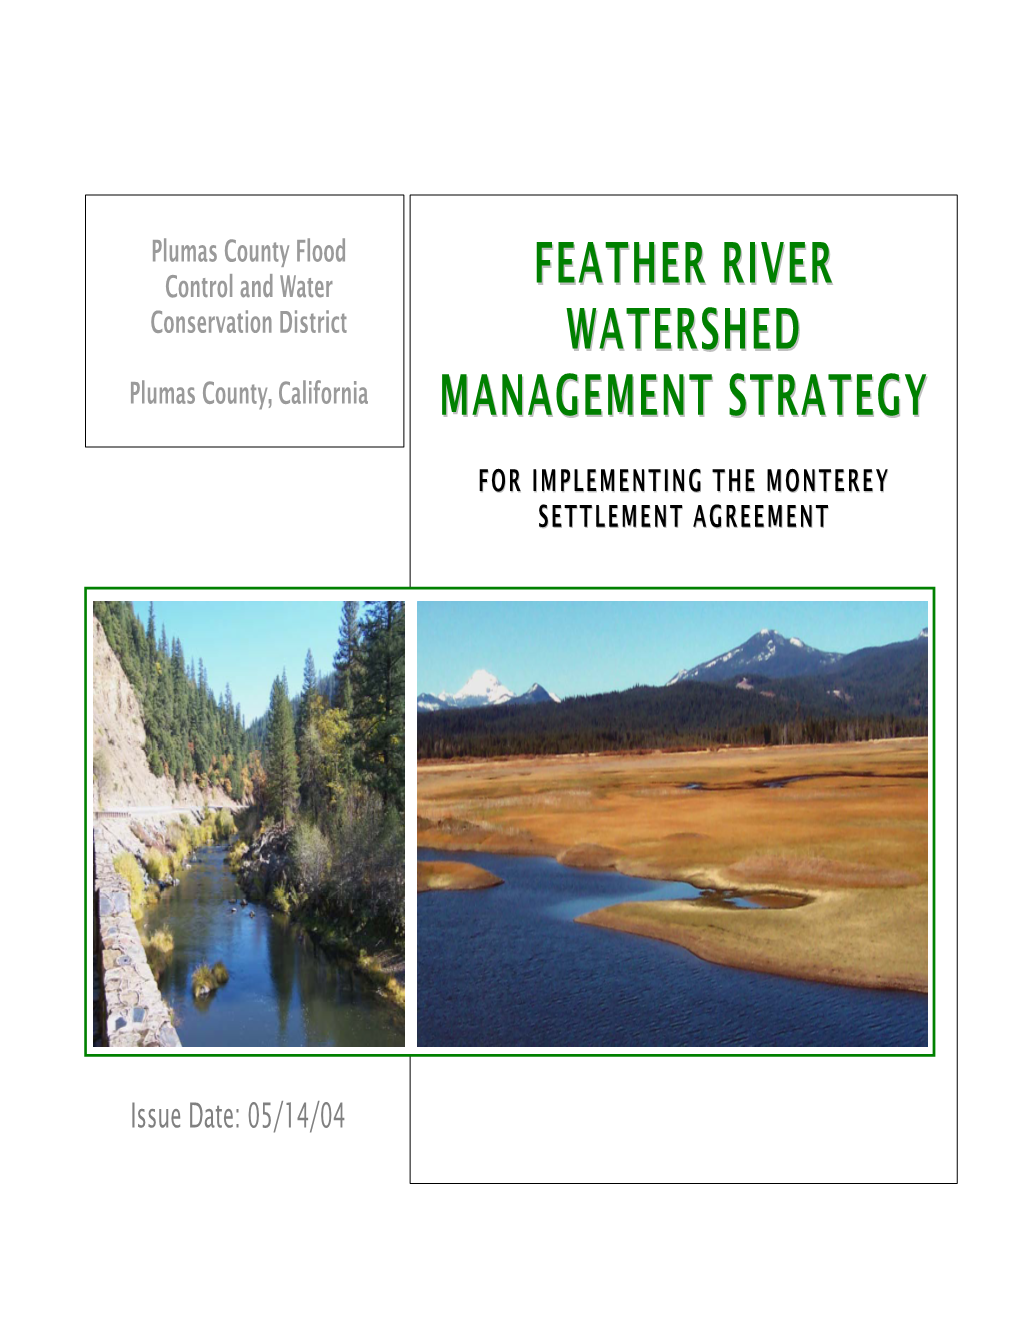 Feather River Watershed Management Strategy